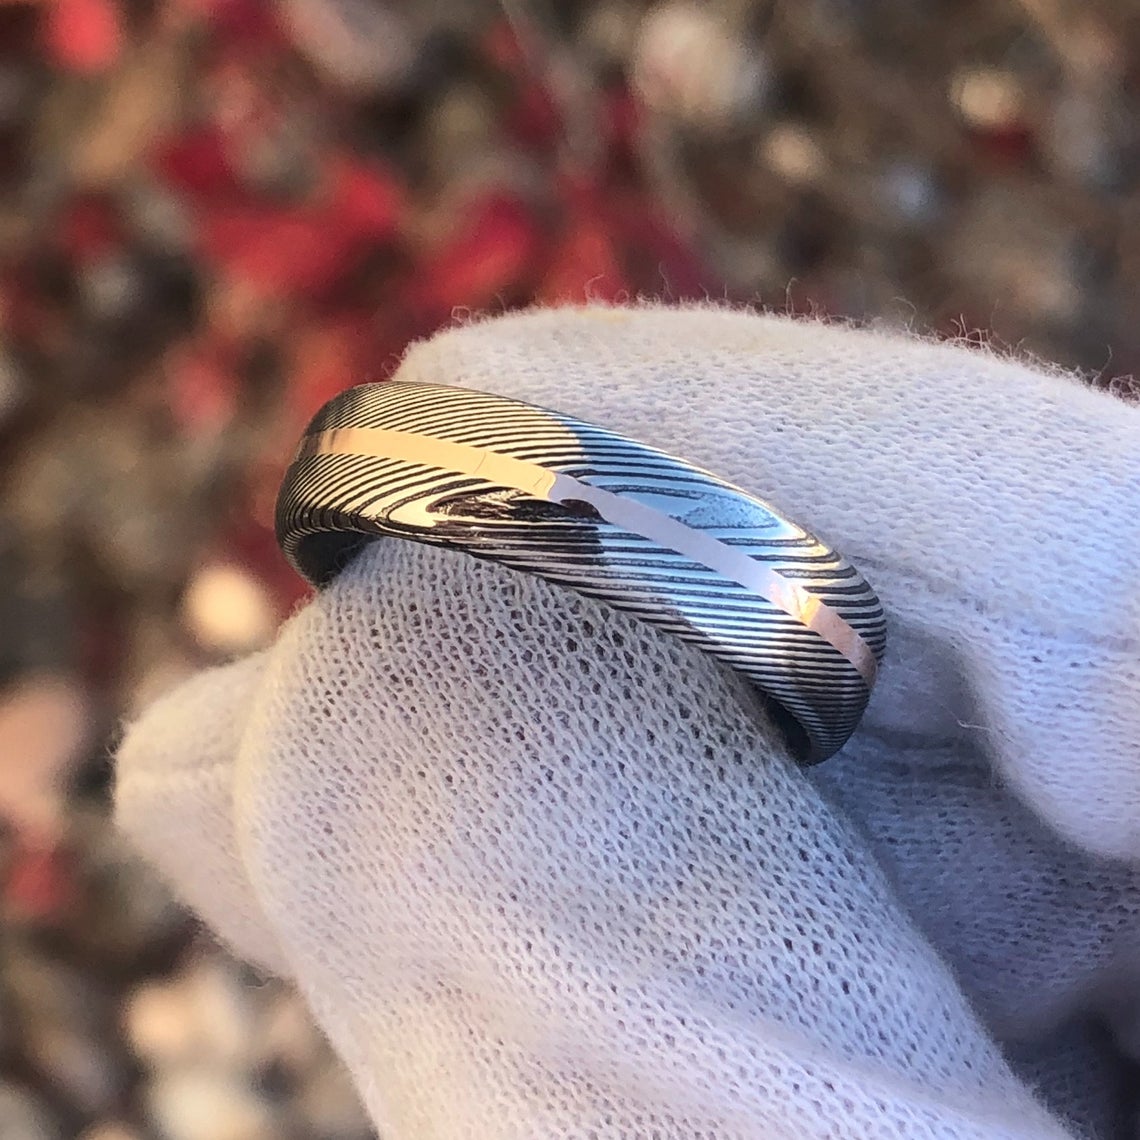 6mm wide Damascus steel ring with a centered rose gold inlay and a rounded profile